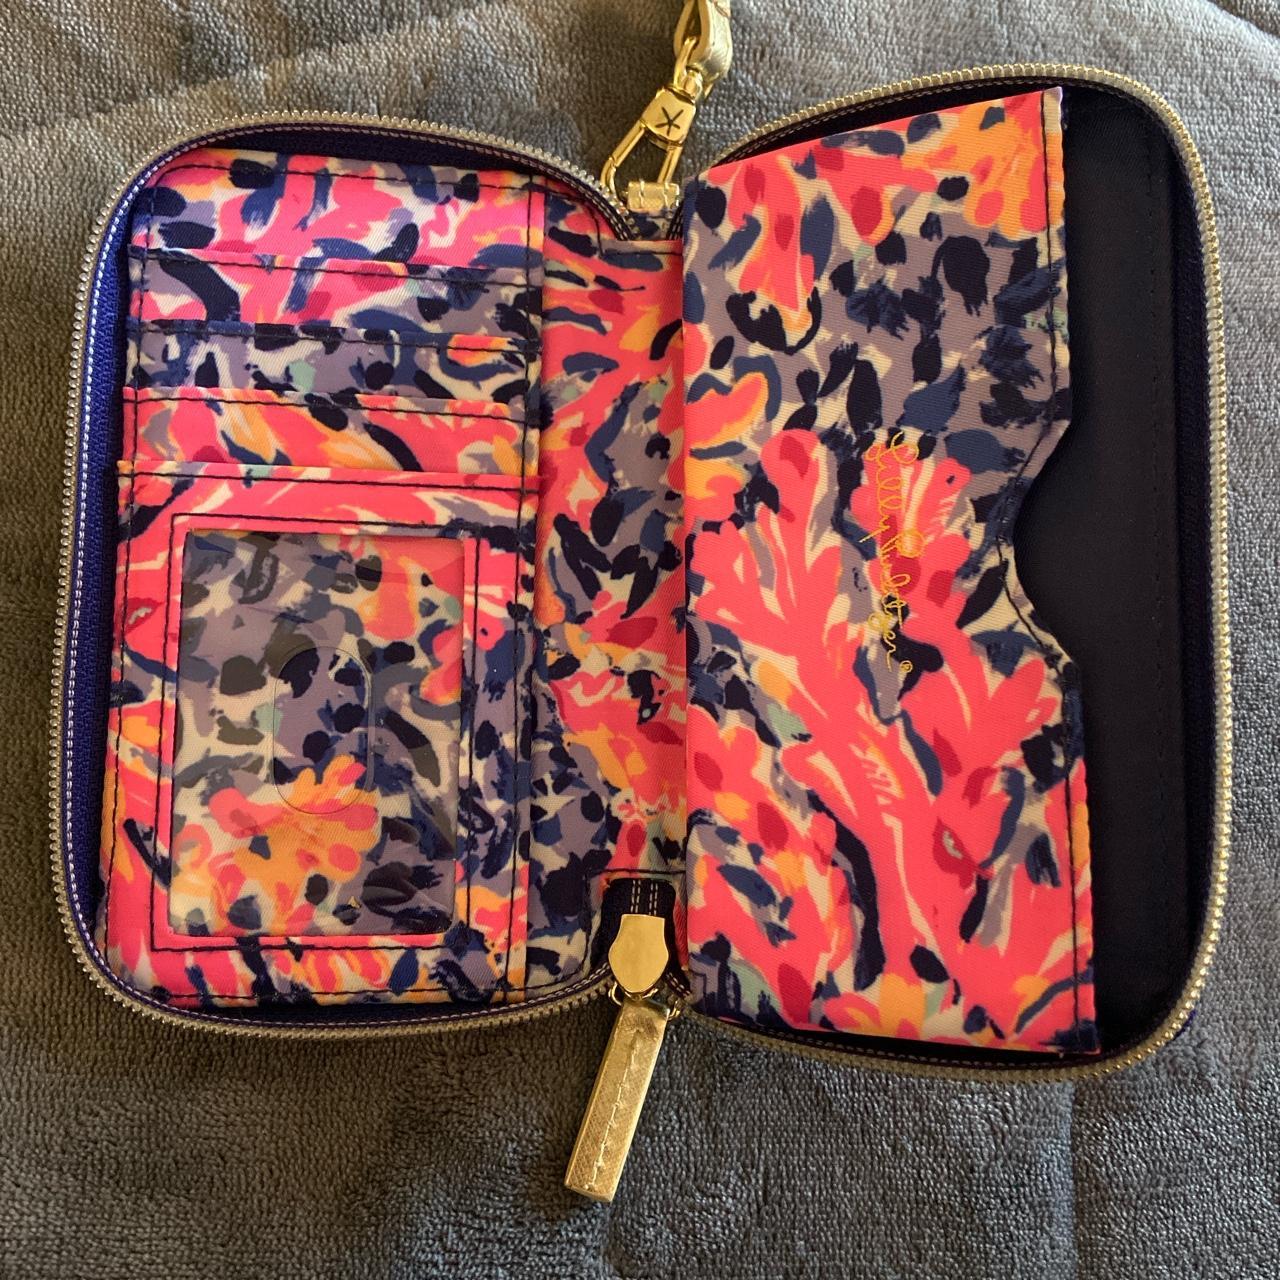 Lilly Pulitzer Women's Pink and Navy Wallet-purses (2)